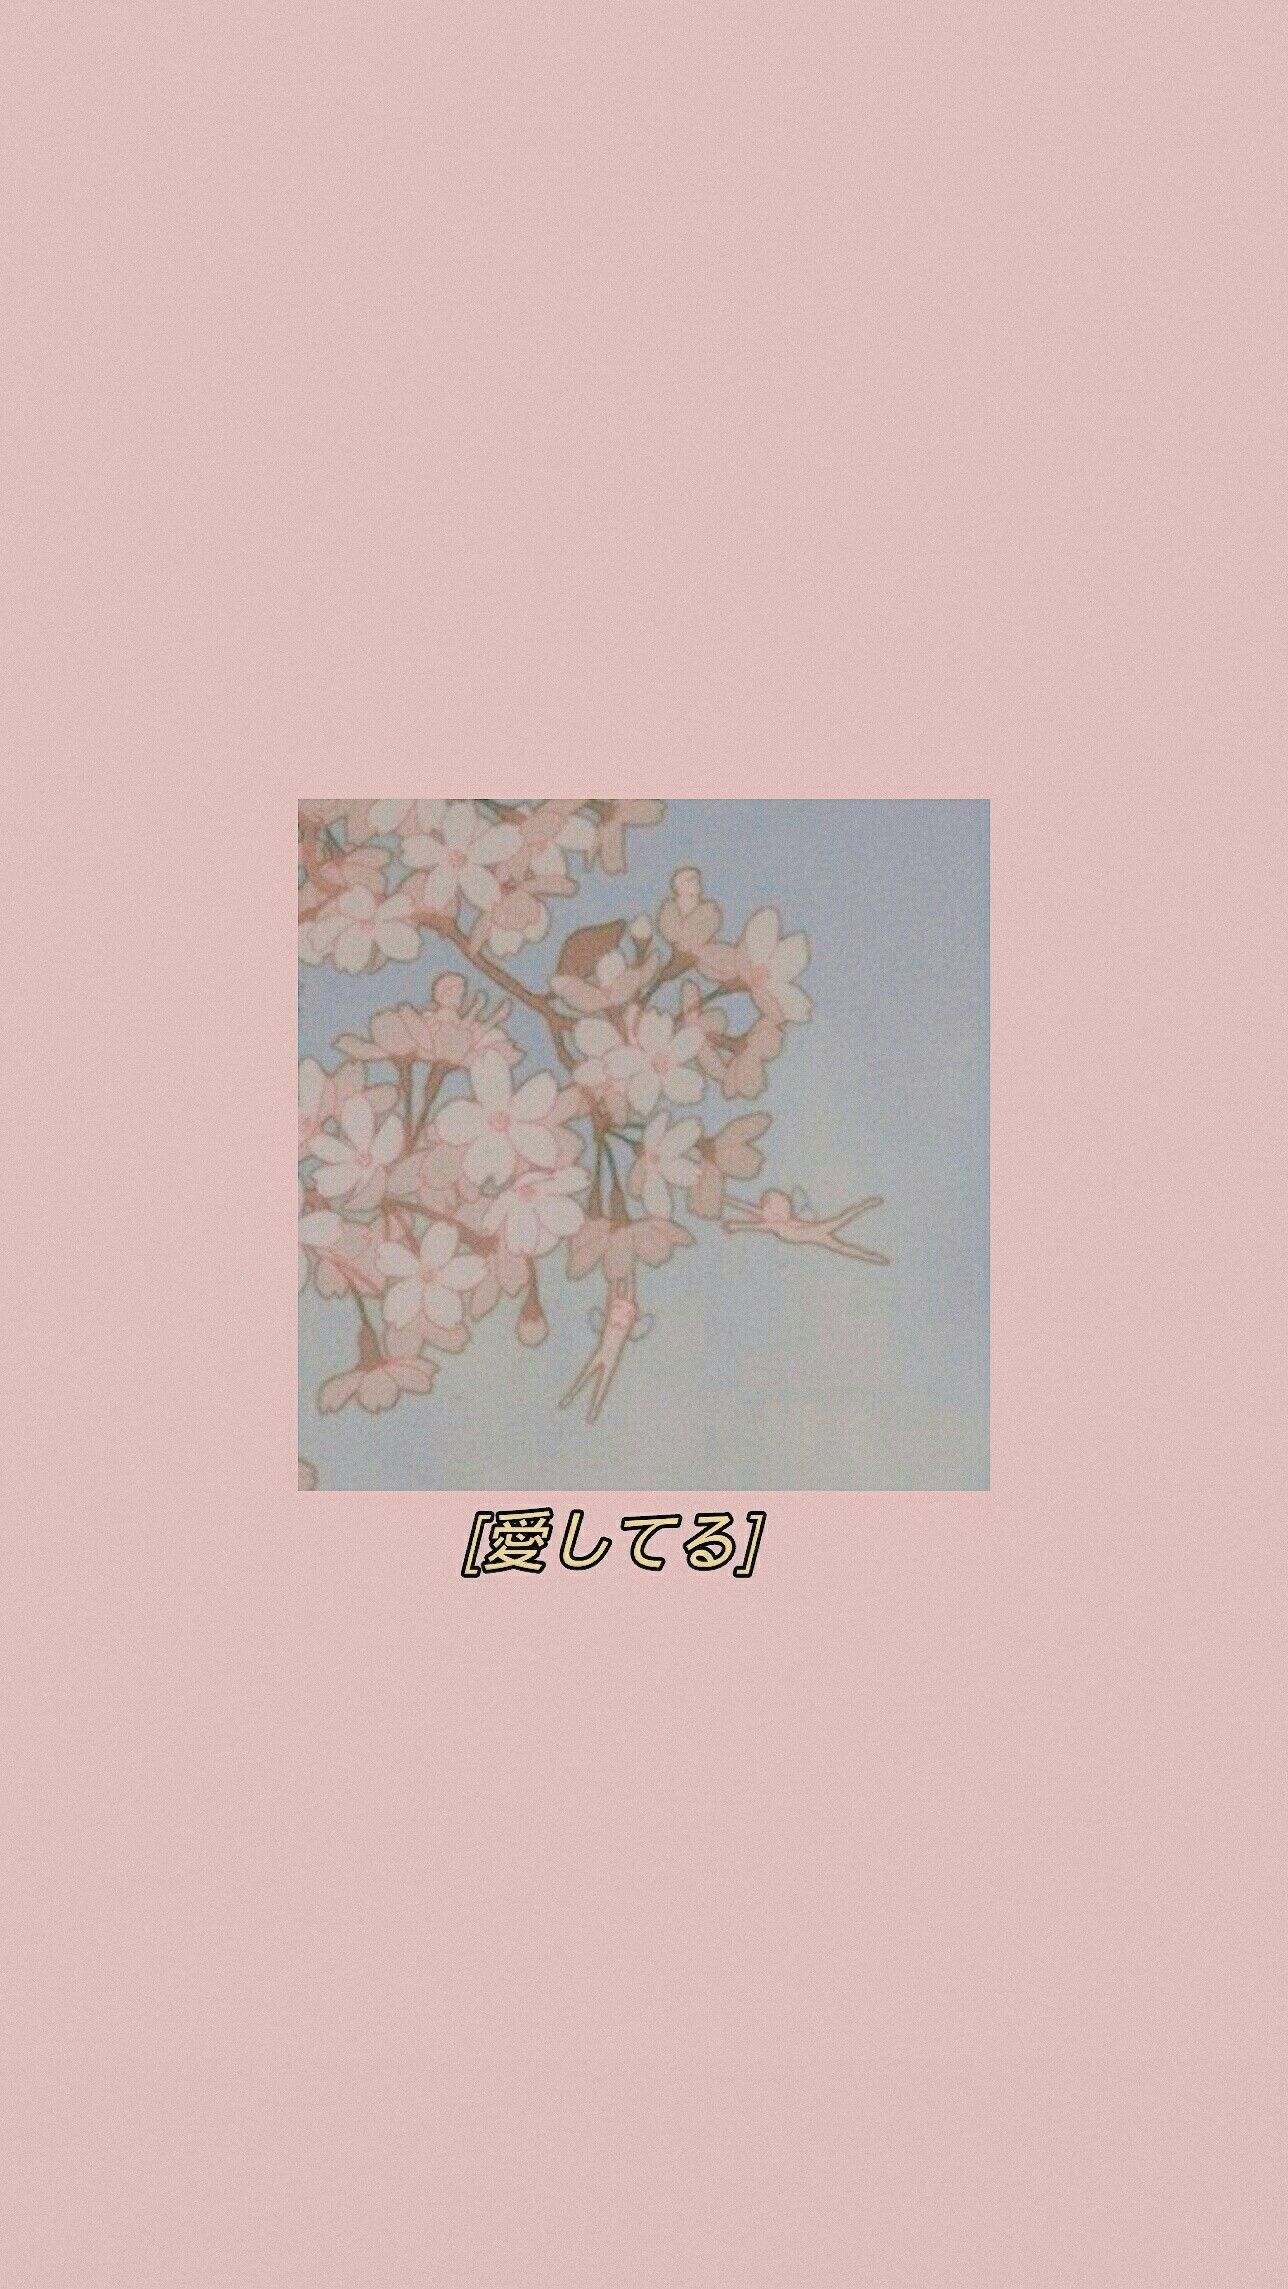 Aesthetic background with cherry blossoms on a pink background - 90s anime